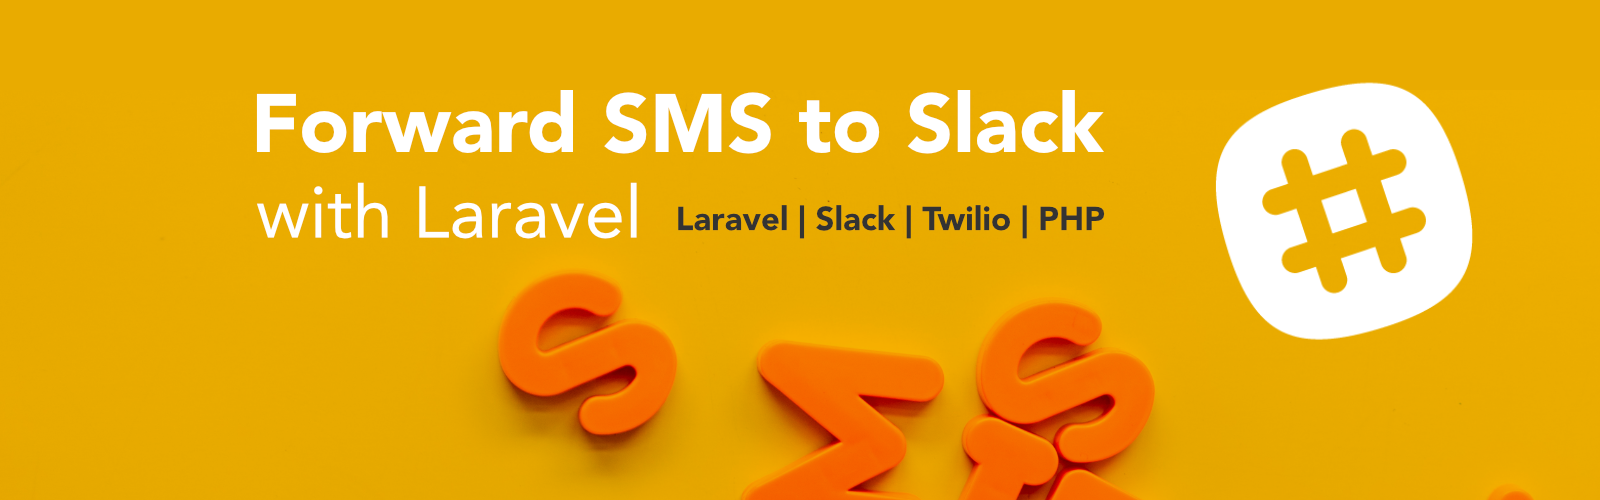 forward-twilio-sms-to-slack-cover-photo.png